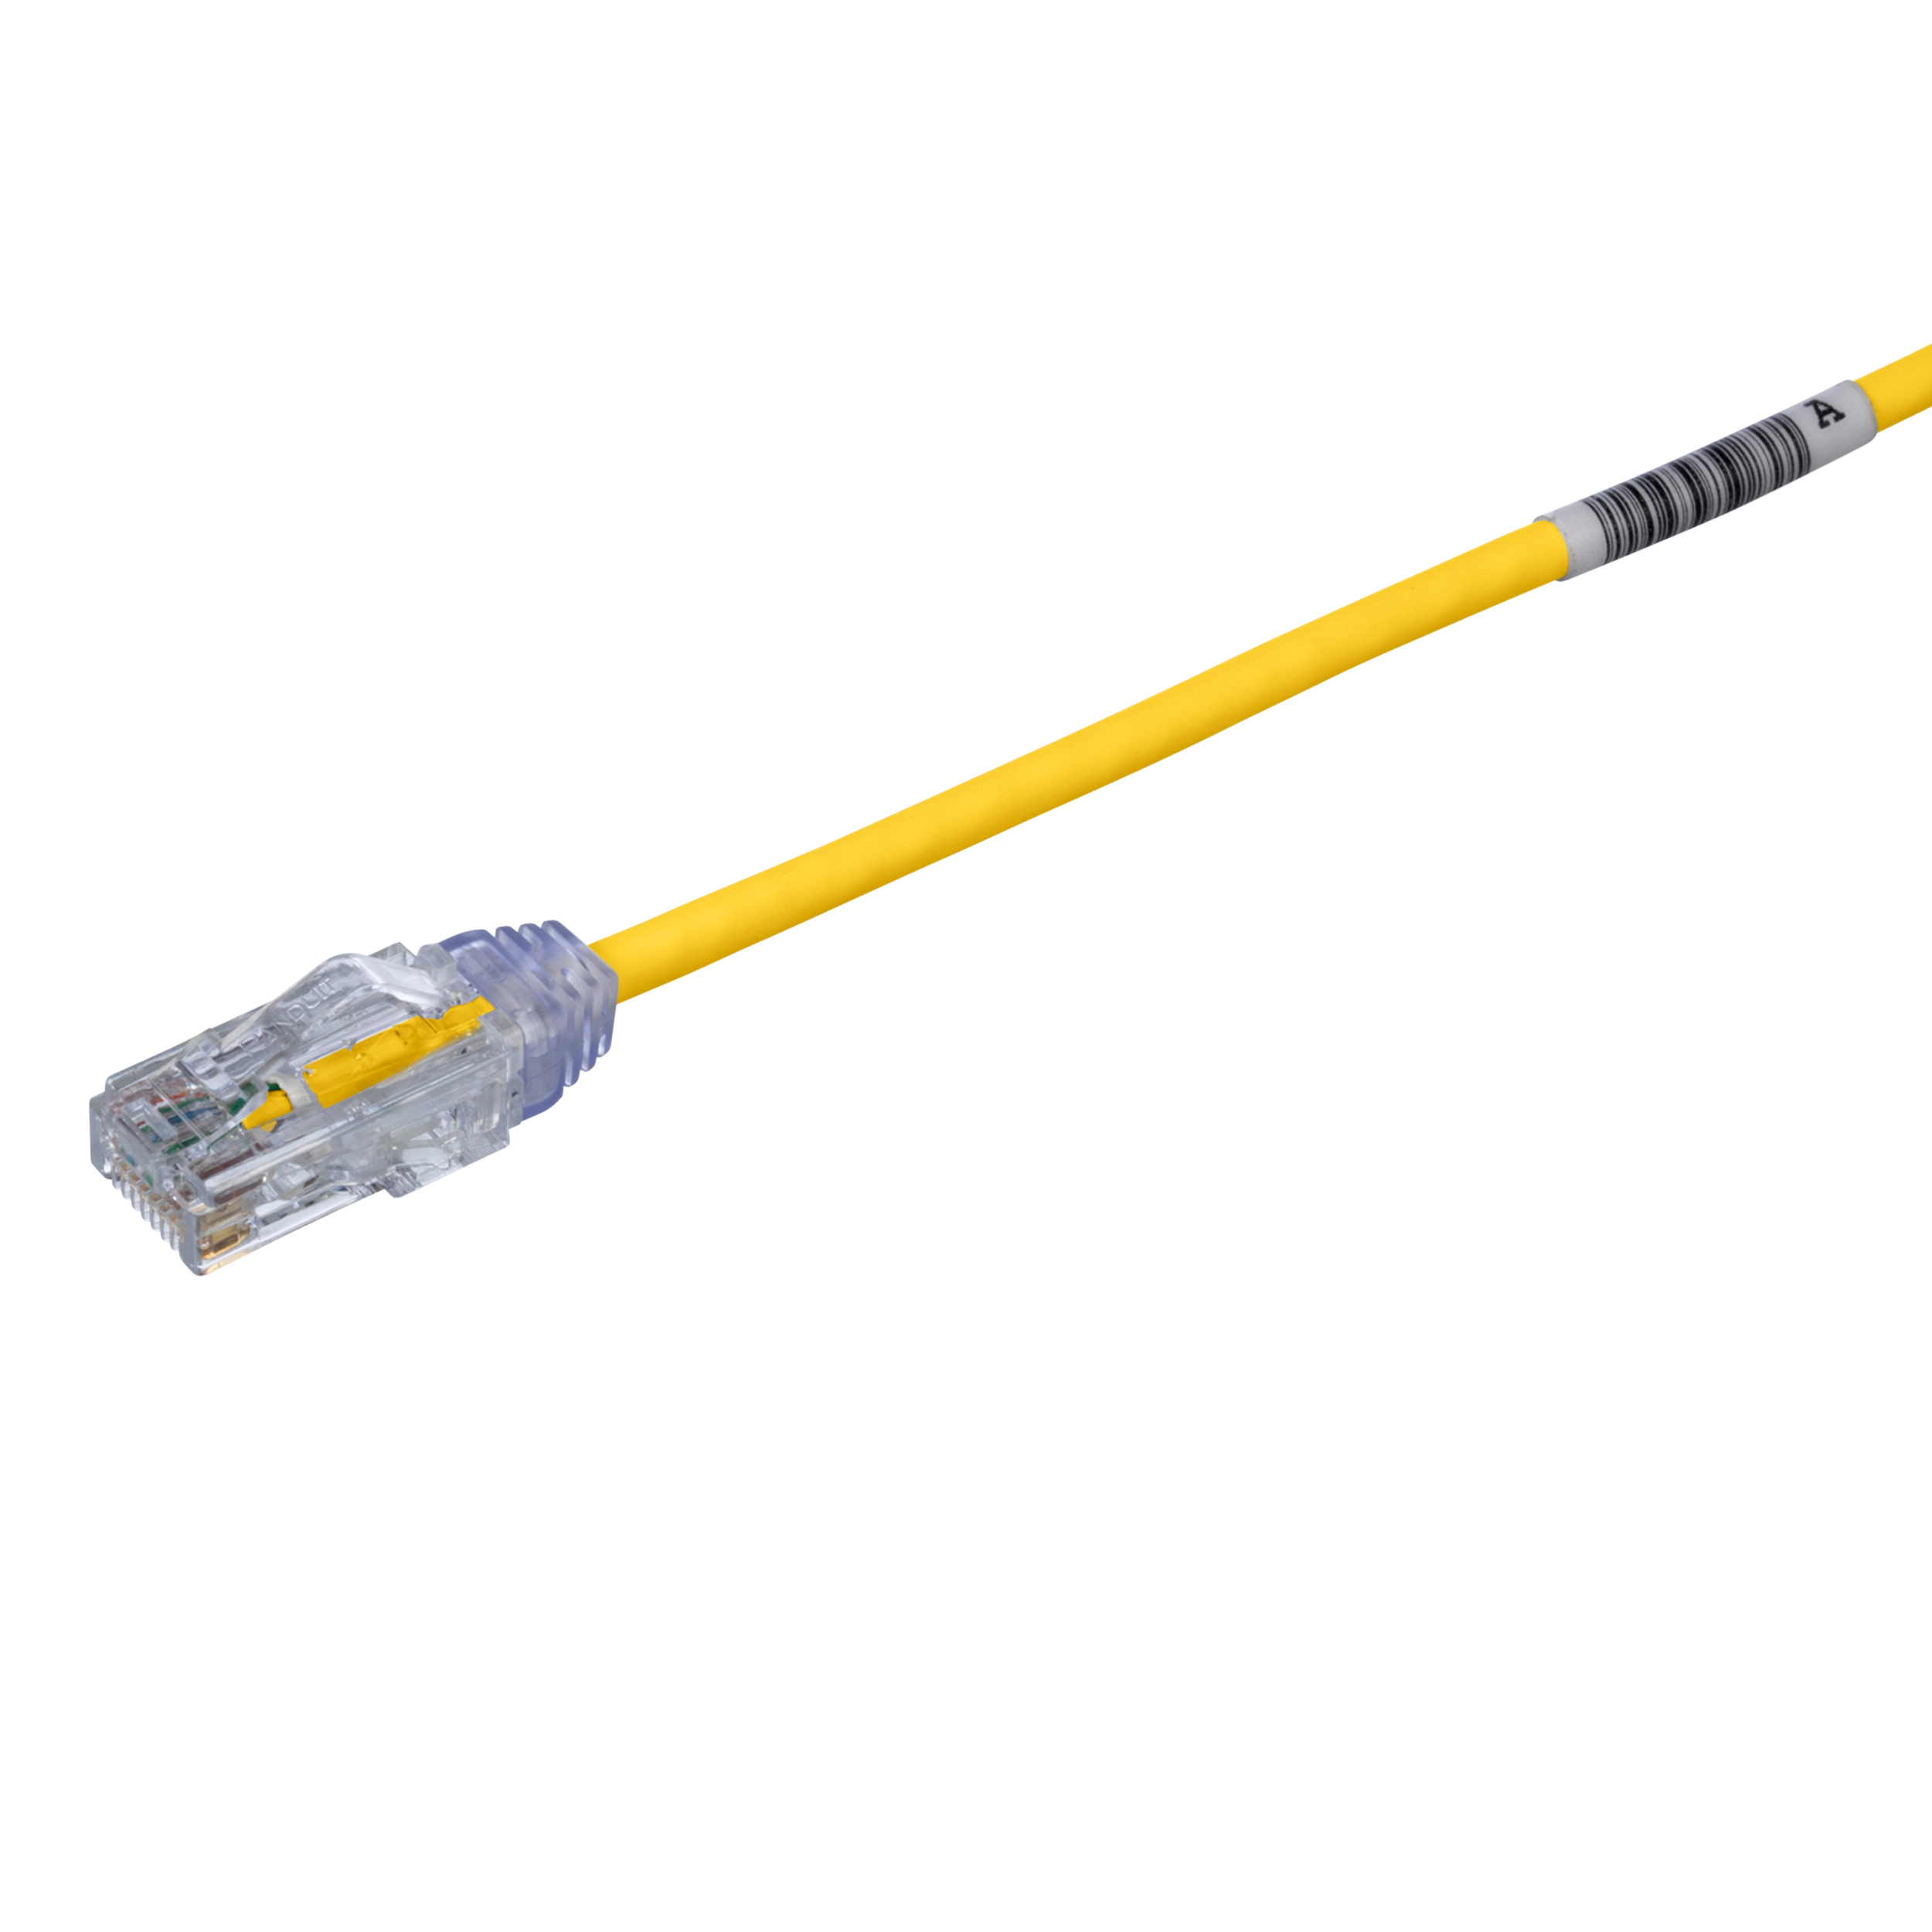 Cat 6 28 AWG UTP Copper Patch Cord, 20 ft, Yellow